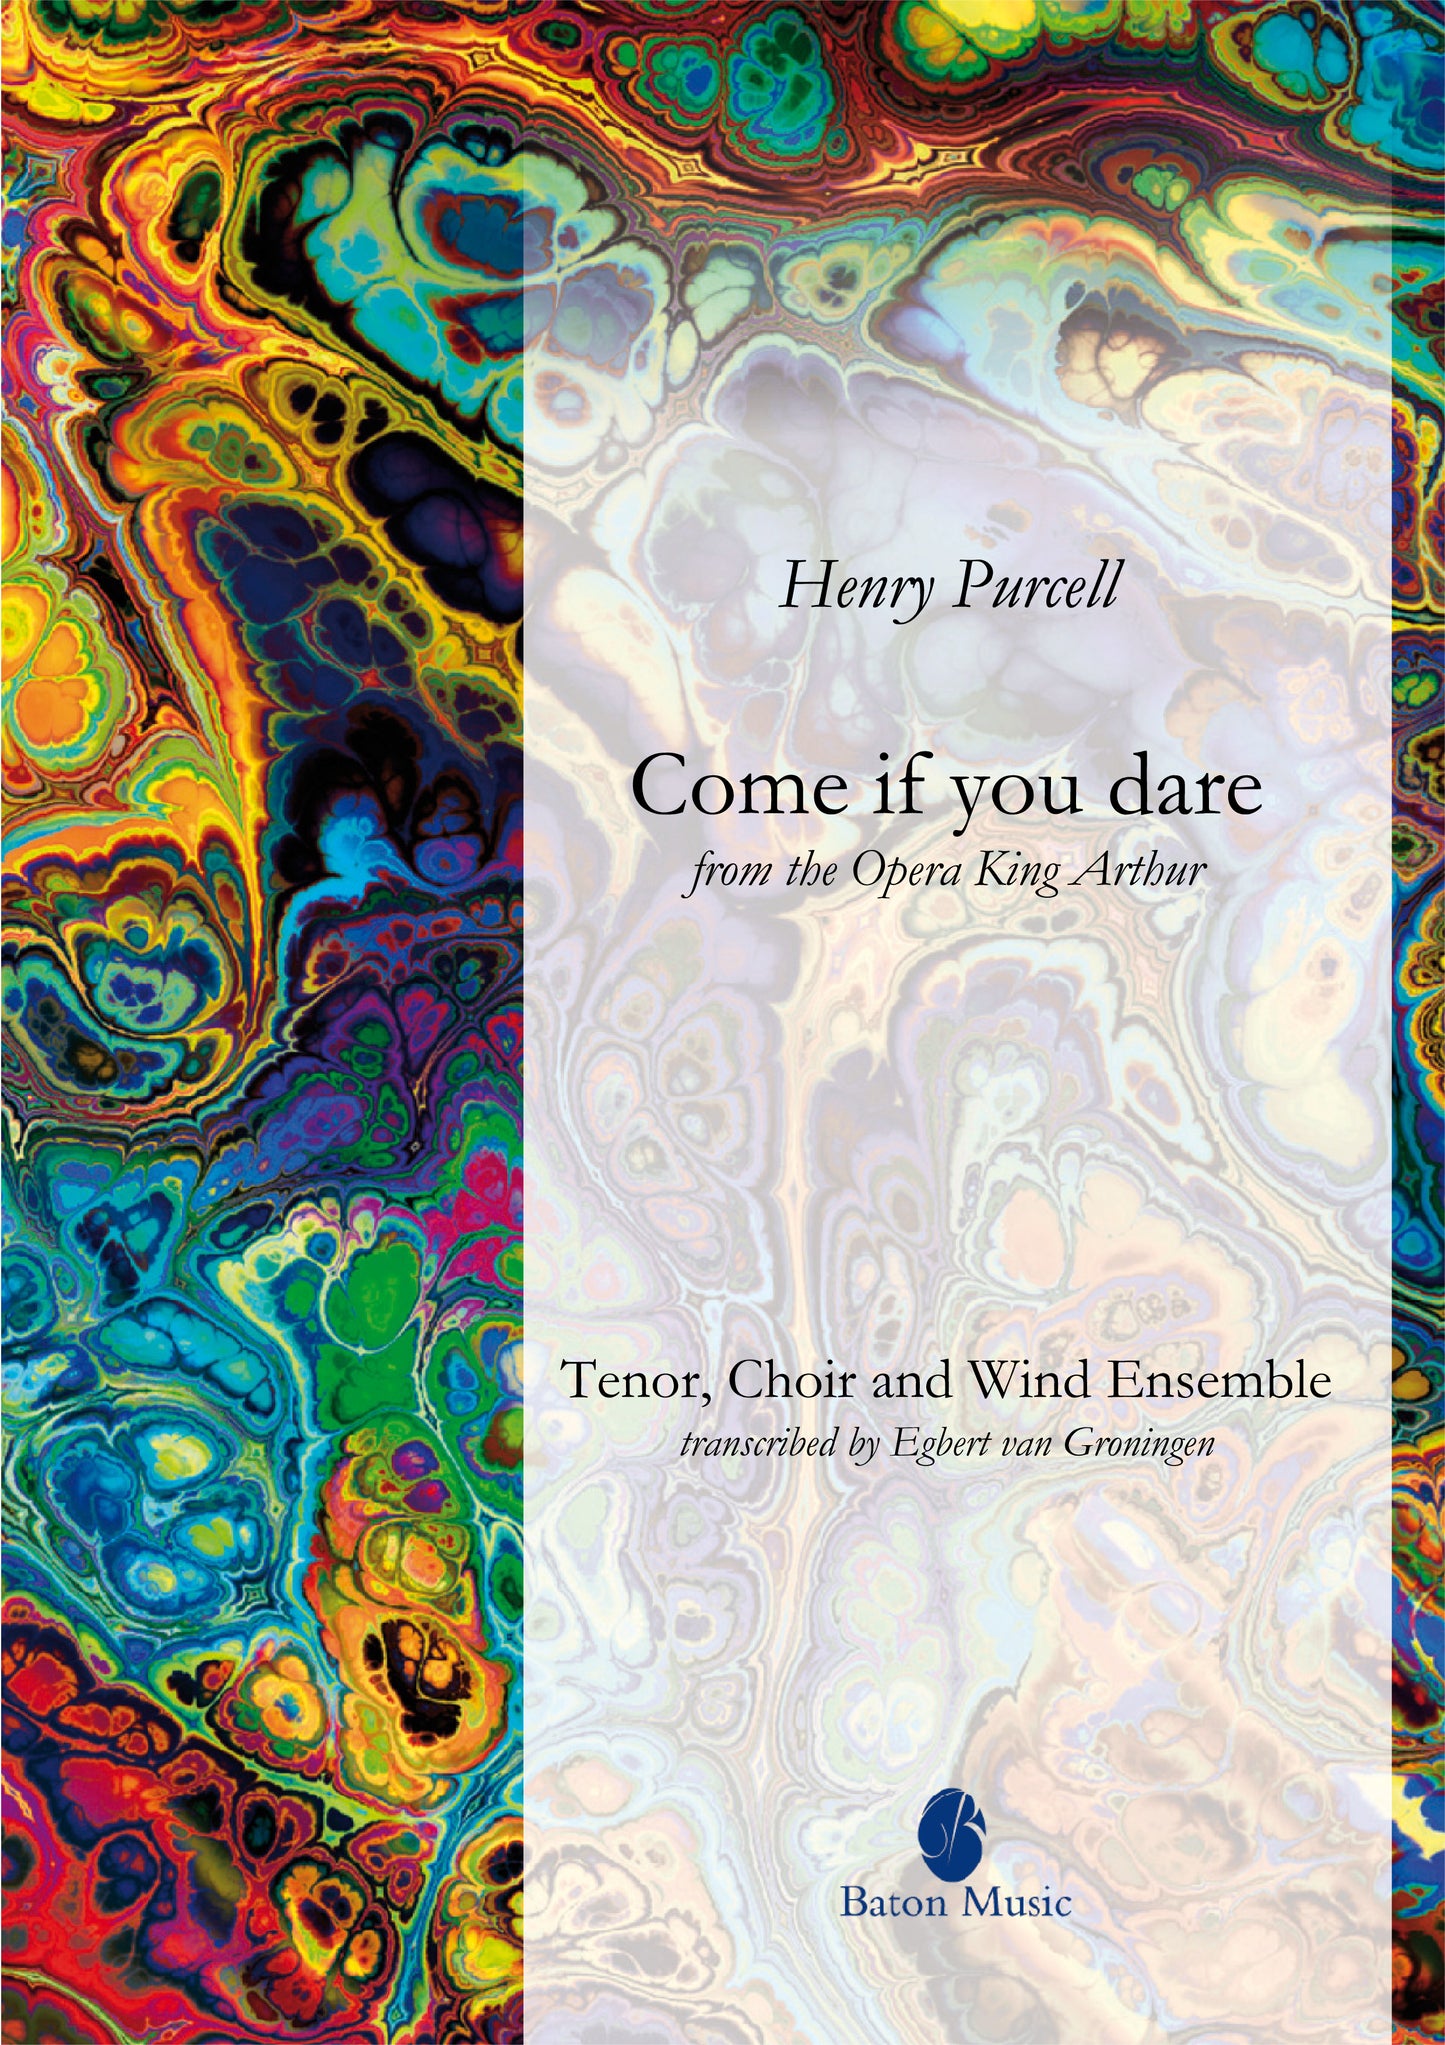 Come if you dare (from the Opera King Arthur) - Henry Purcell